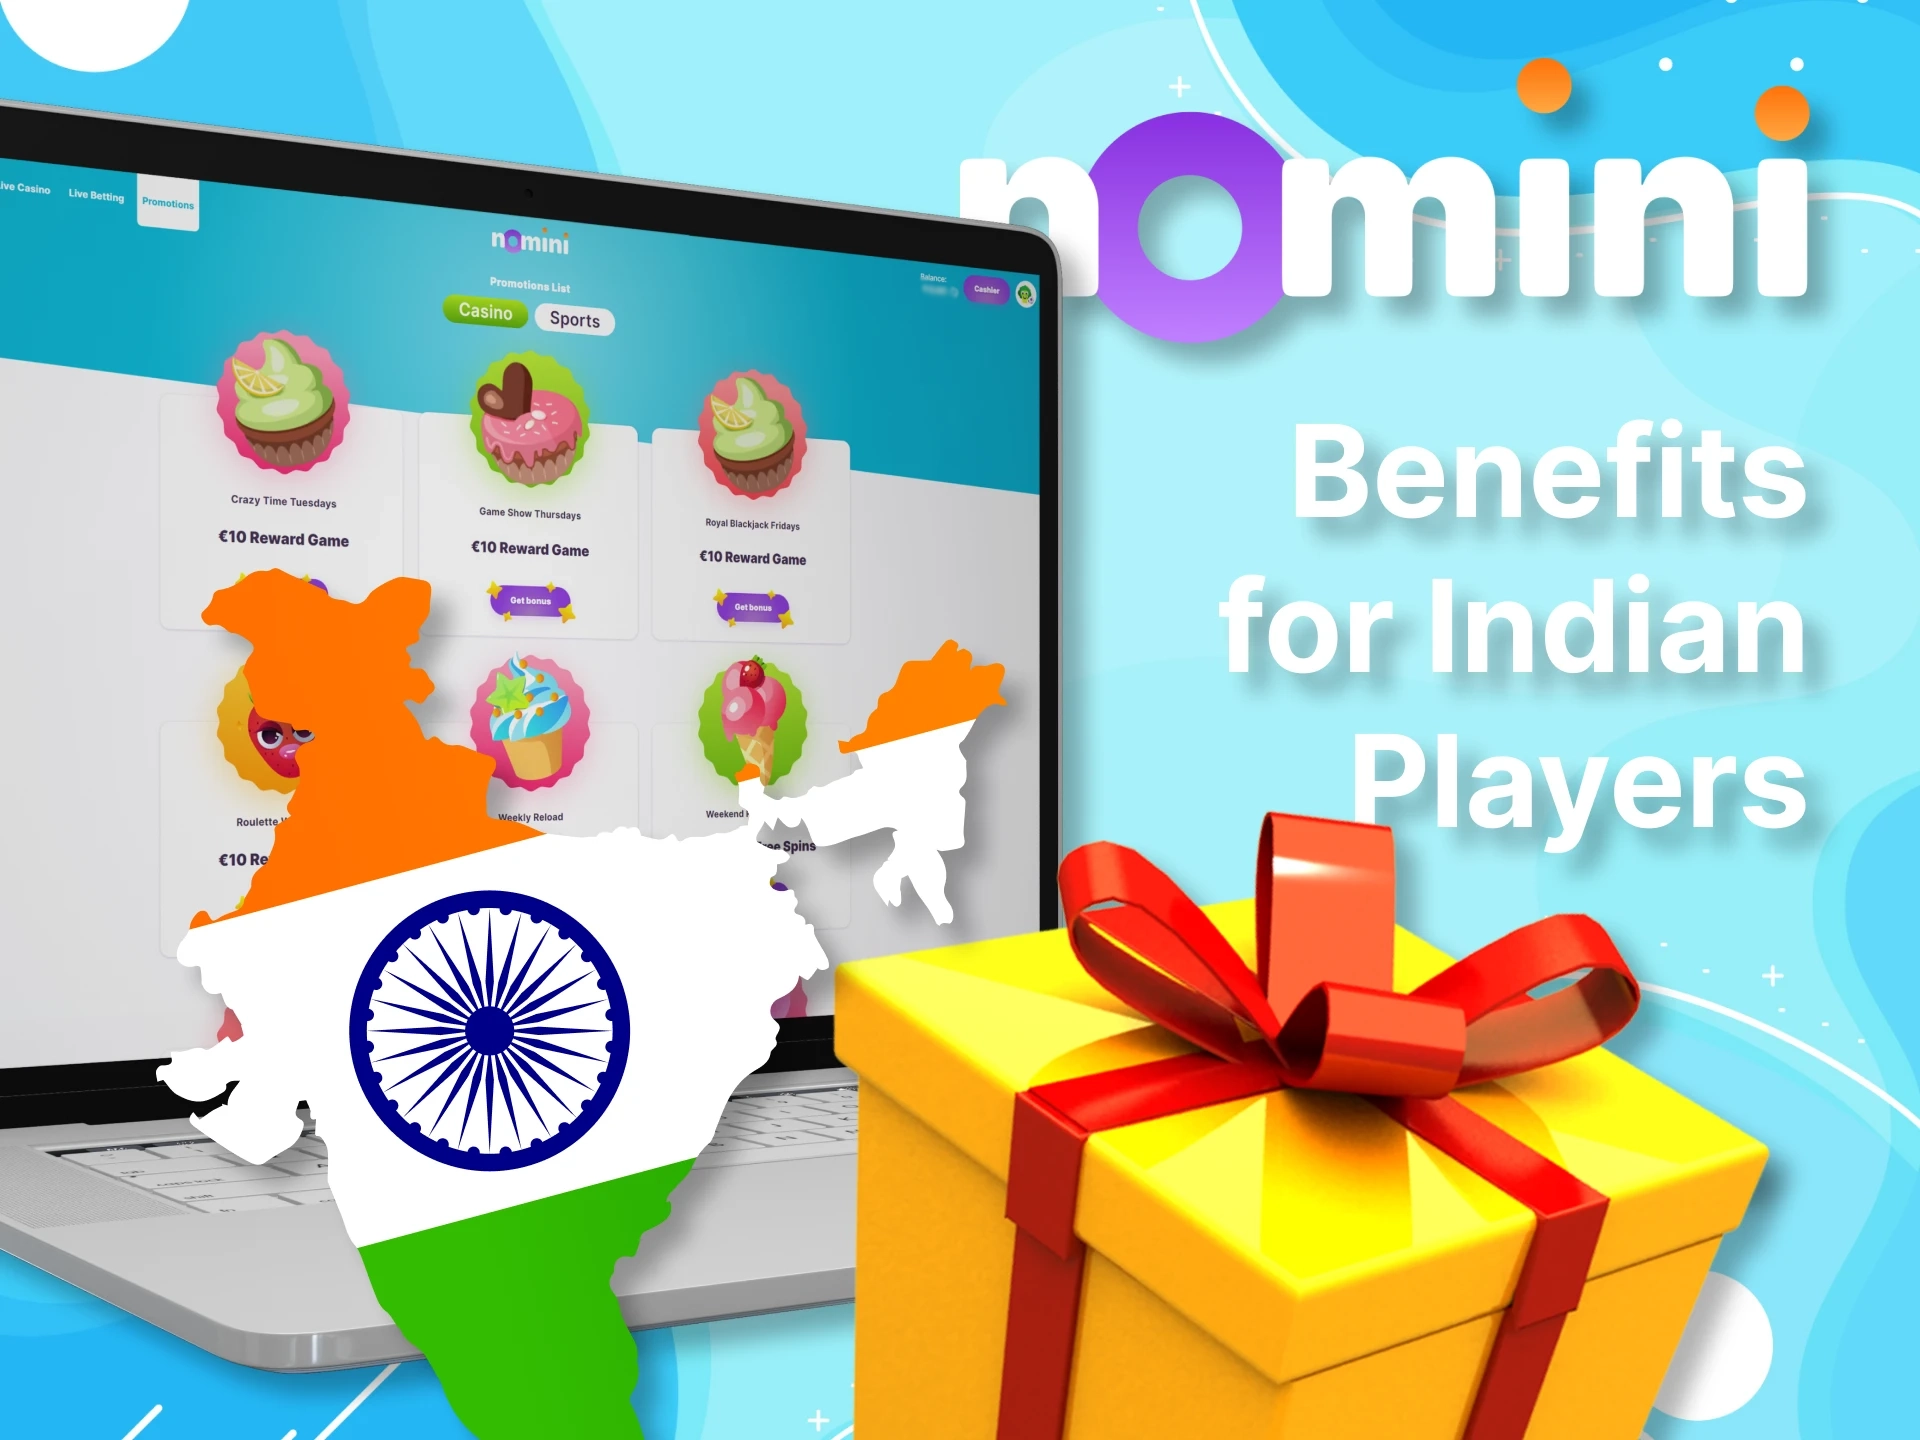 Nomini has many bonuses and benefits for players from India.